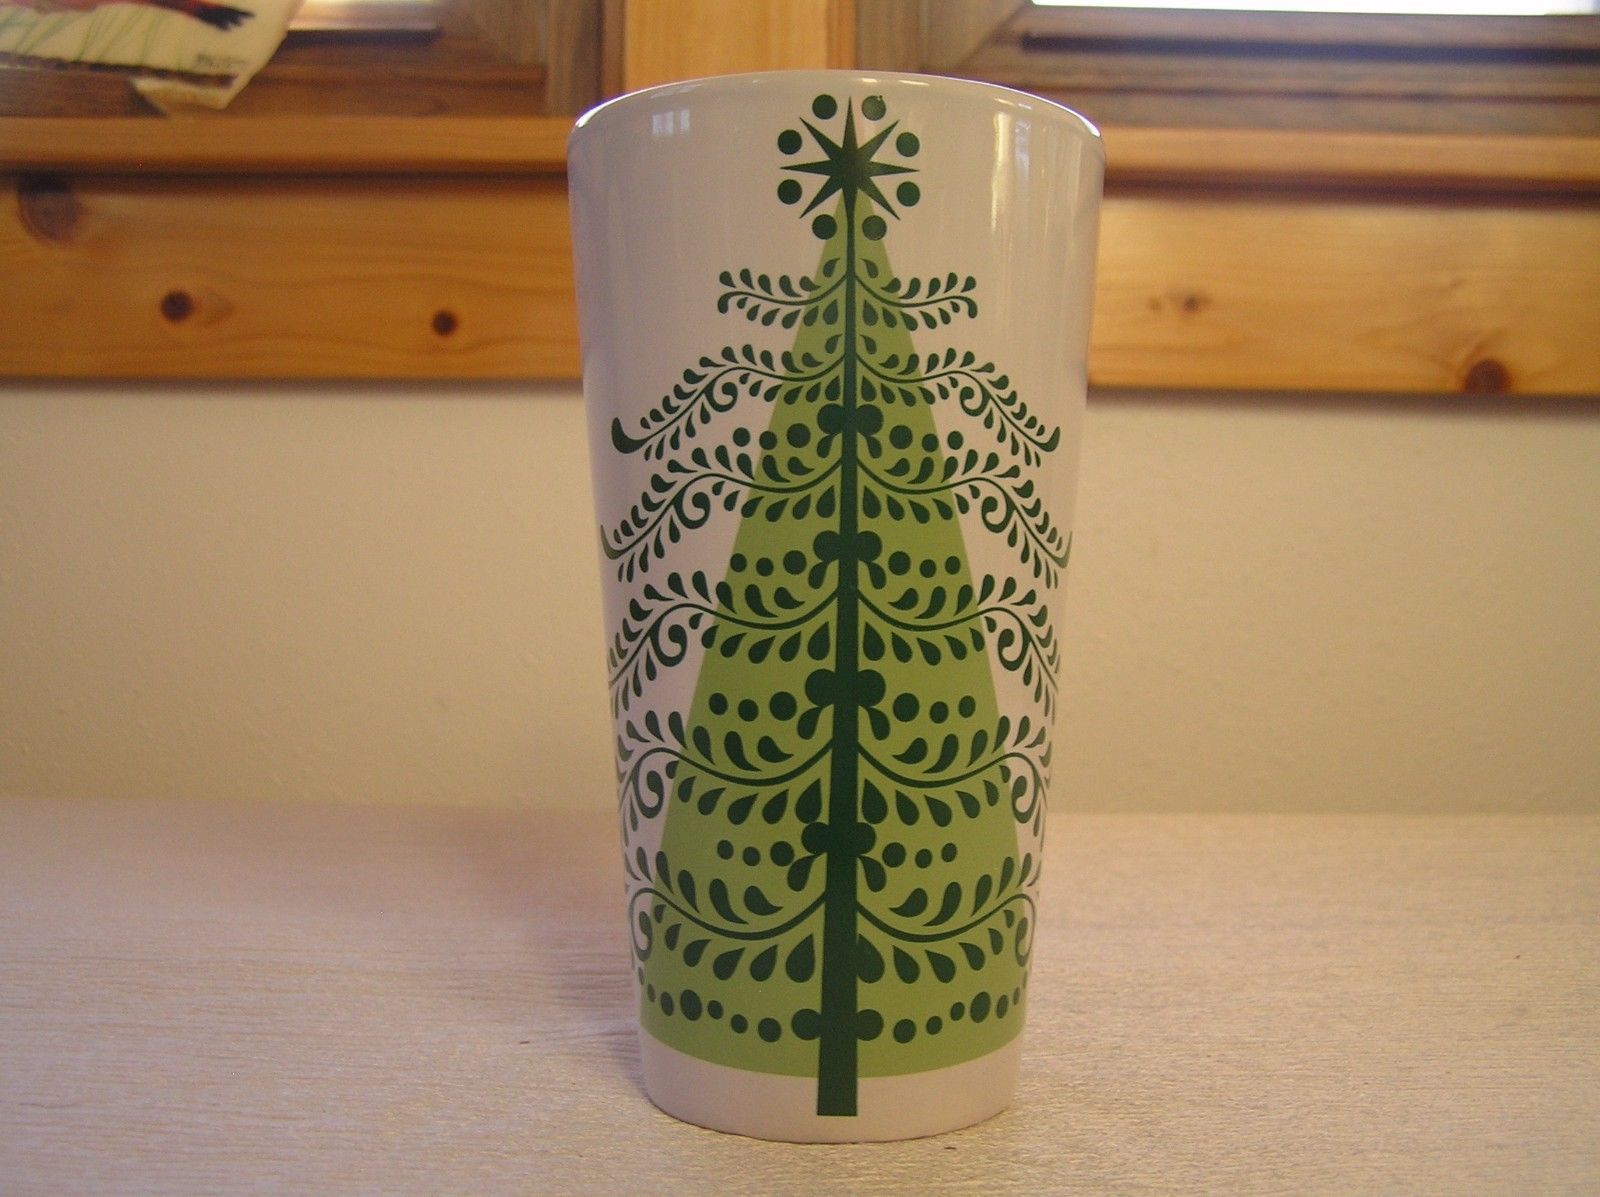 Estate Large Starbucks 2011 White with Tall Christmas Tree Coffee Mug Cup – 6 in - $8.59